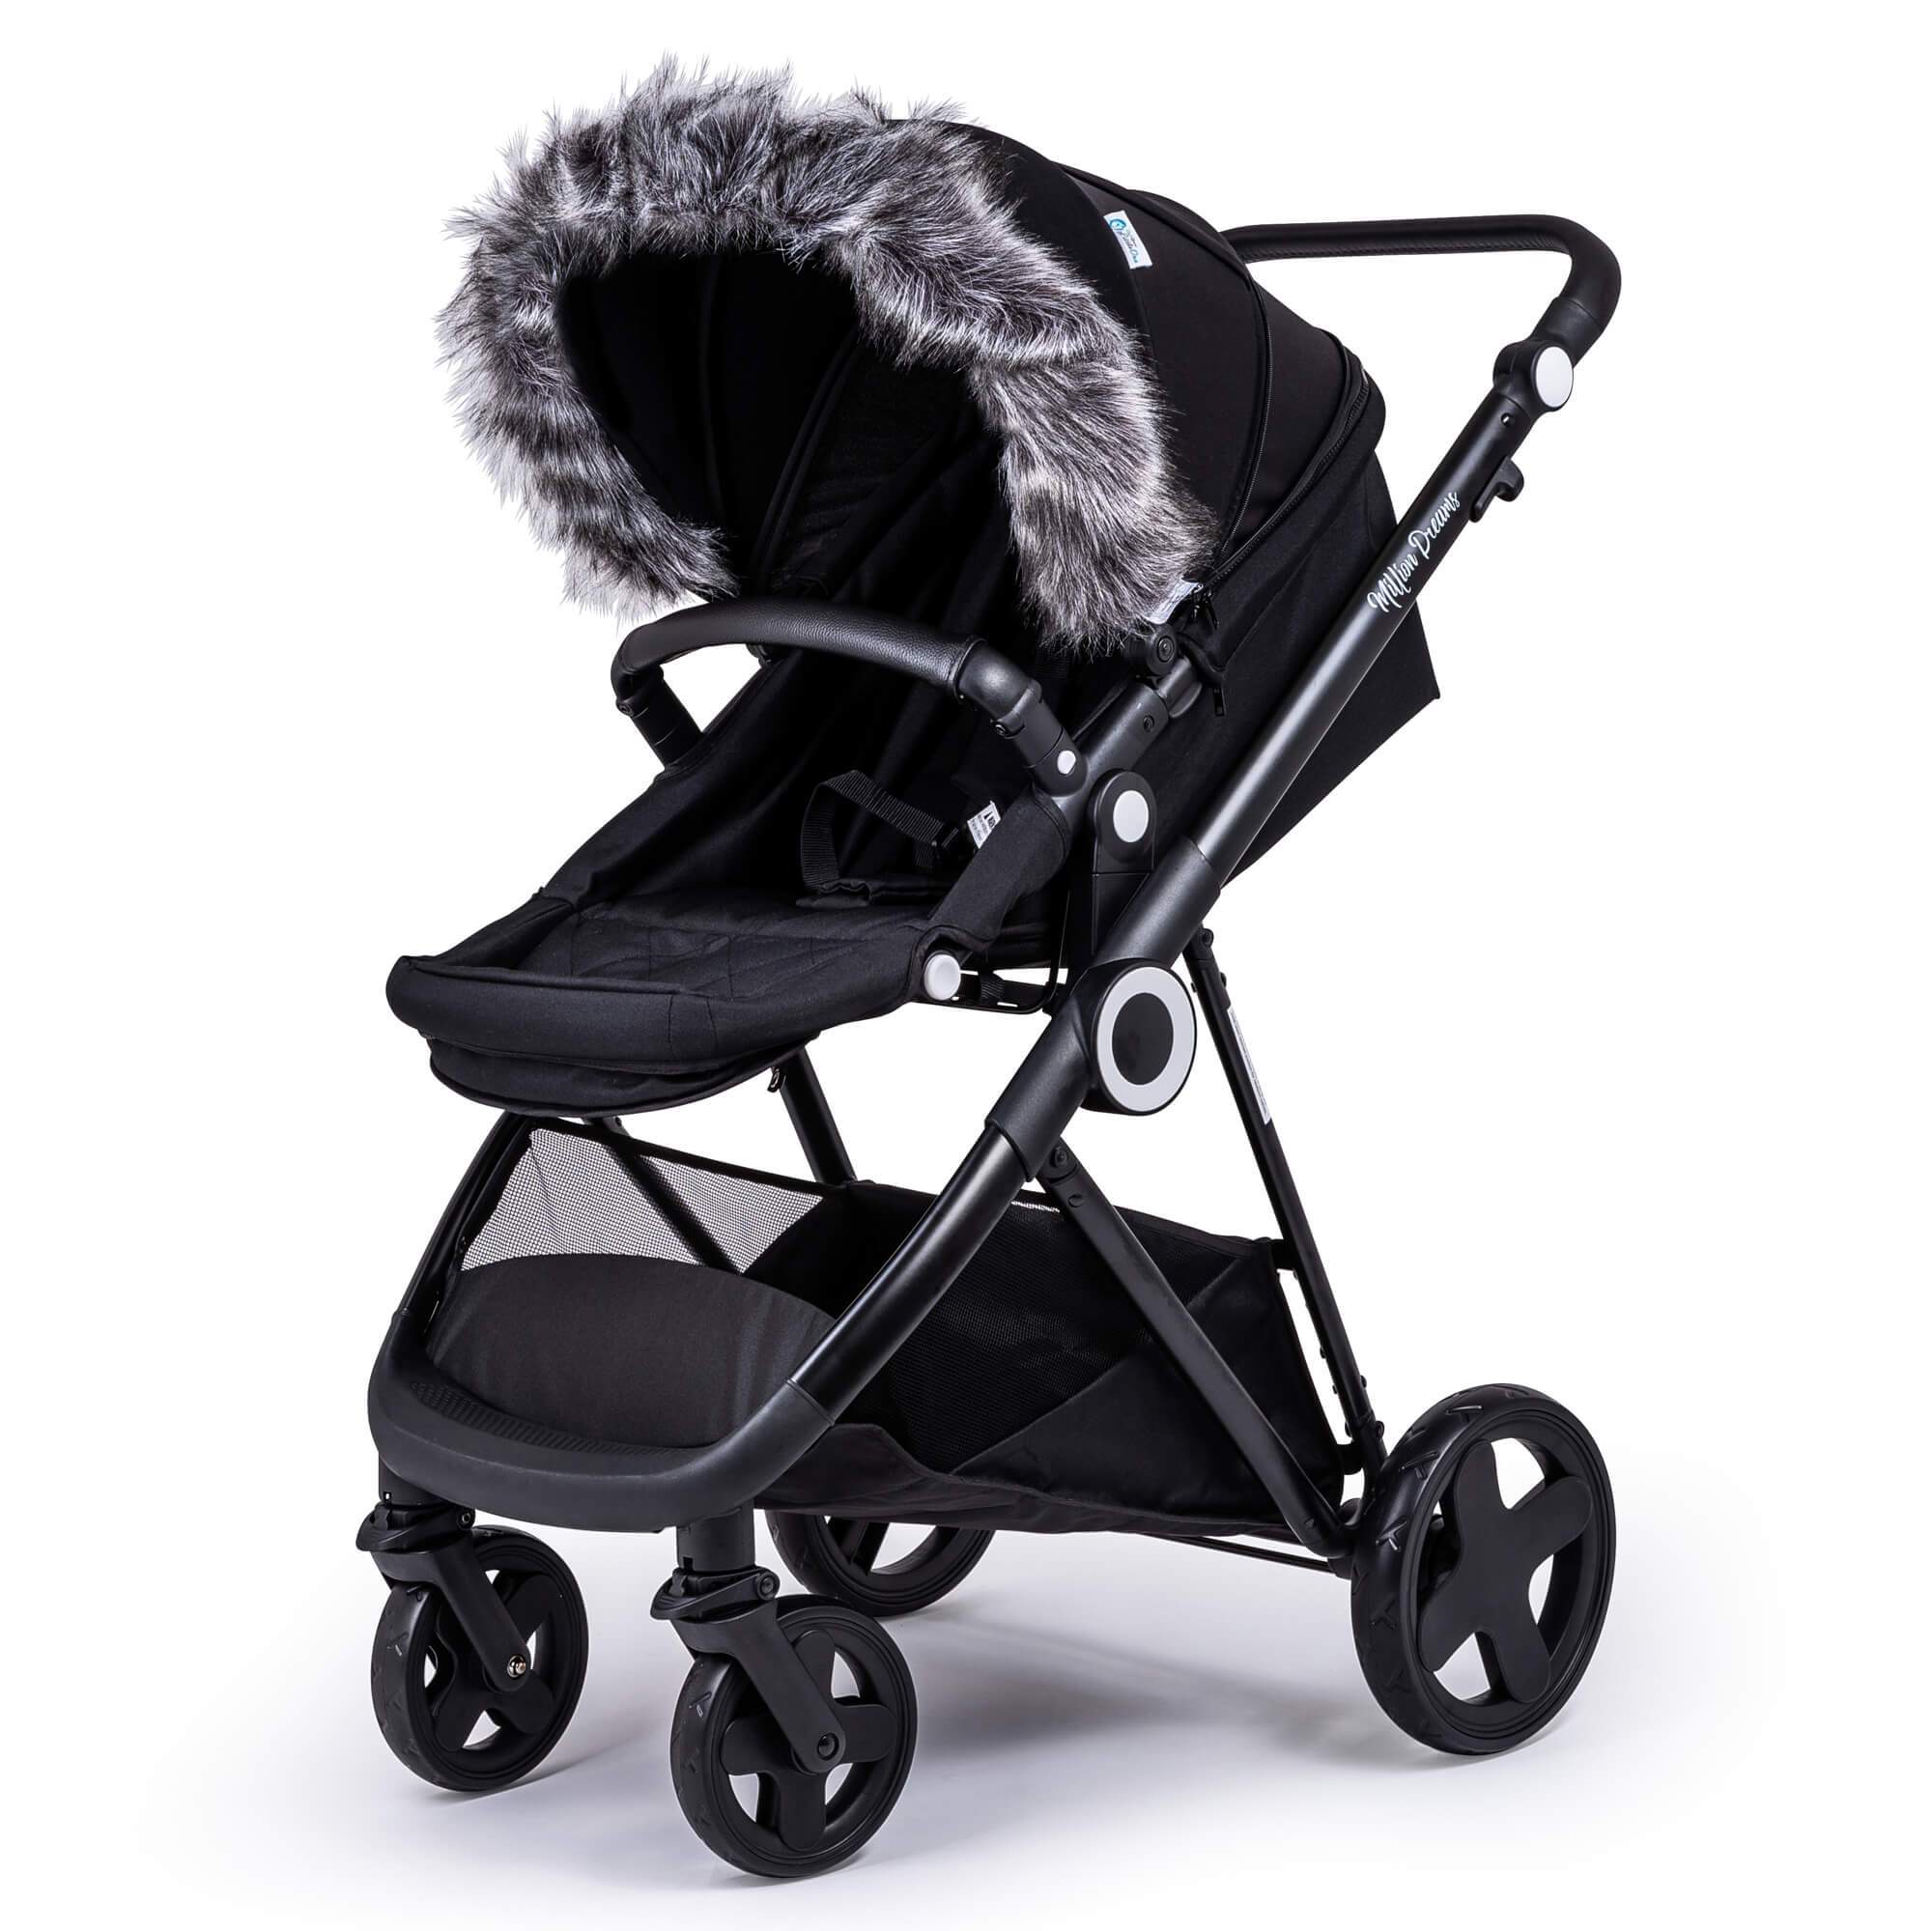 Pram Fur Hood Trim Attachment for Pushchair Compatible with Mountain Buggy - Dark Grey / Fits All Models | For Your Little One